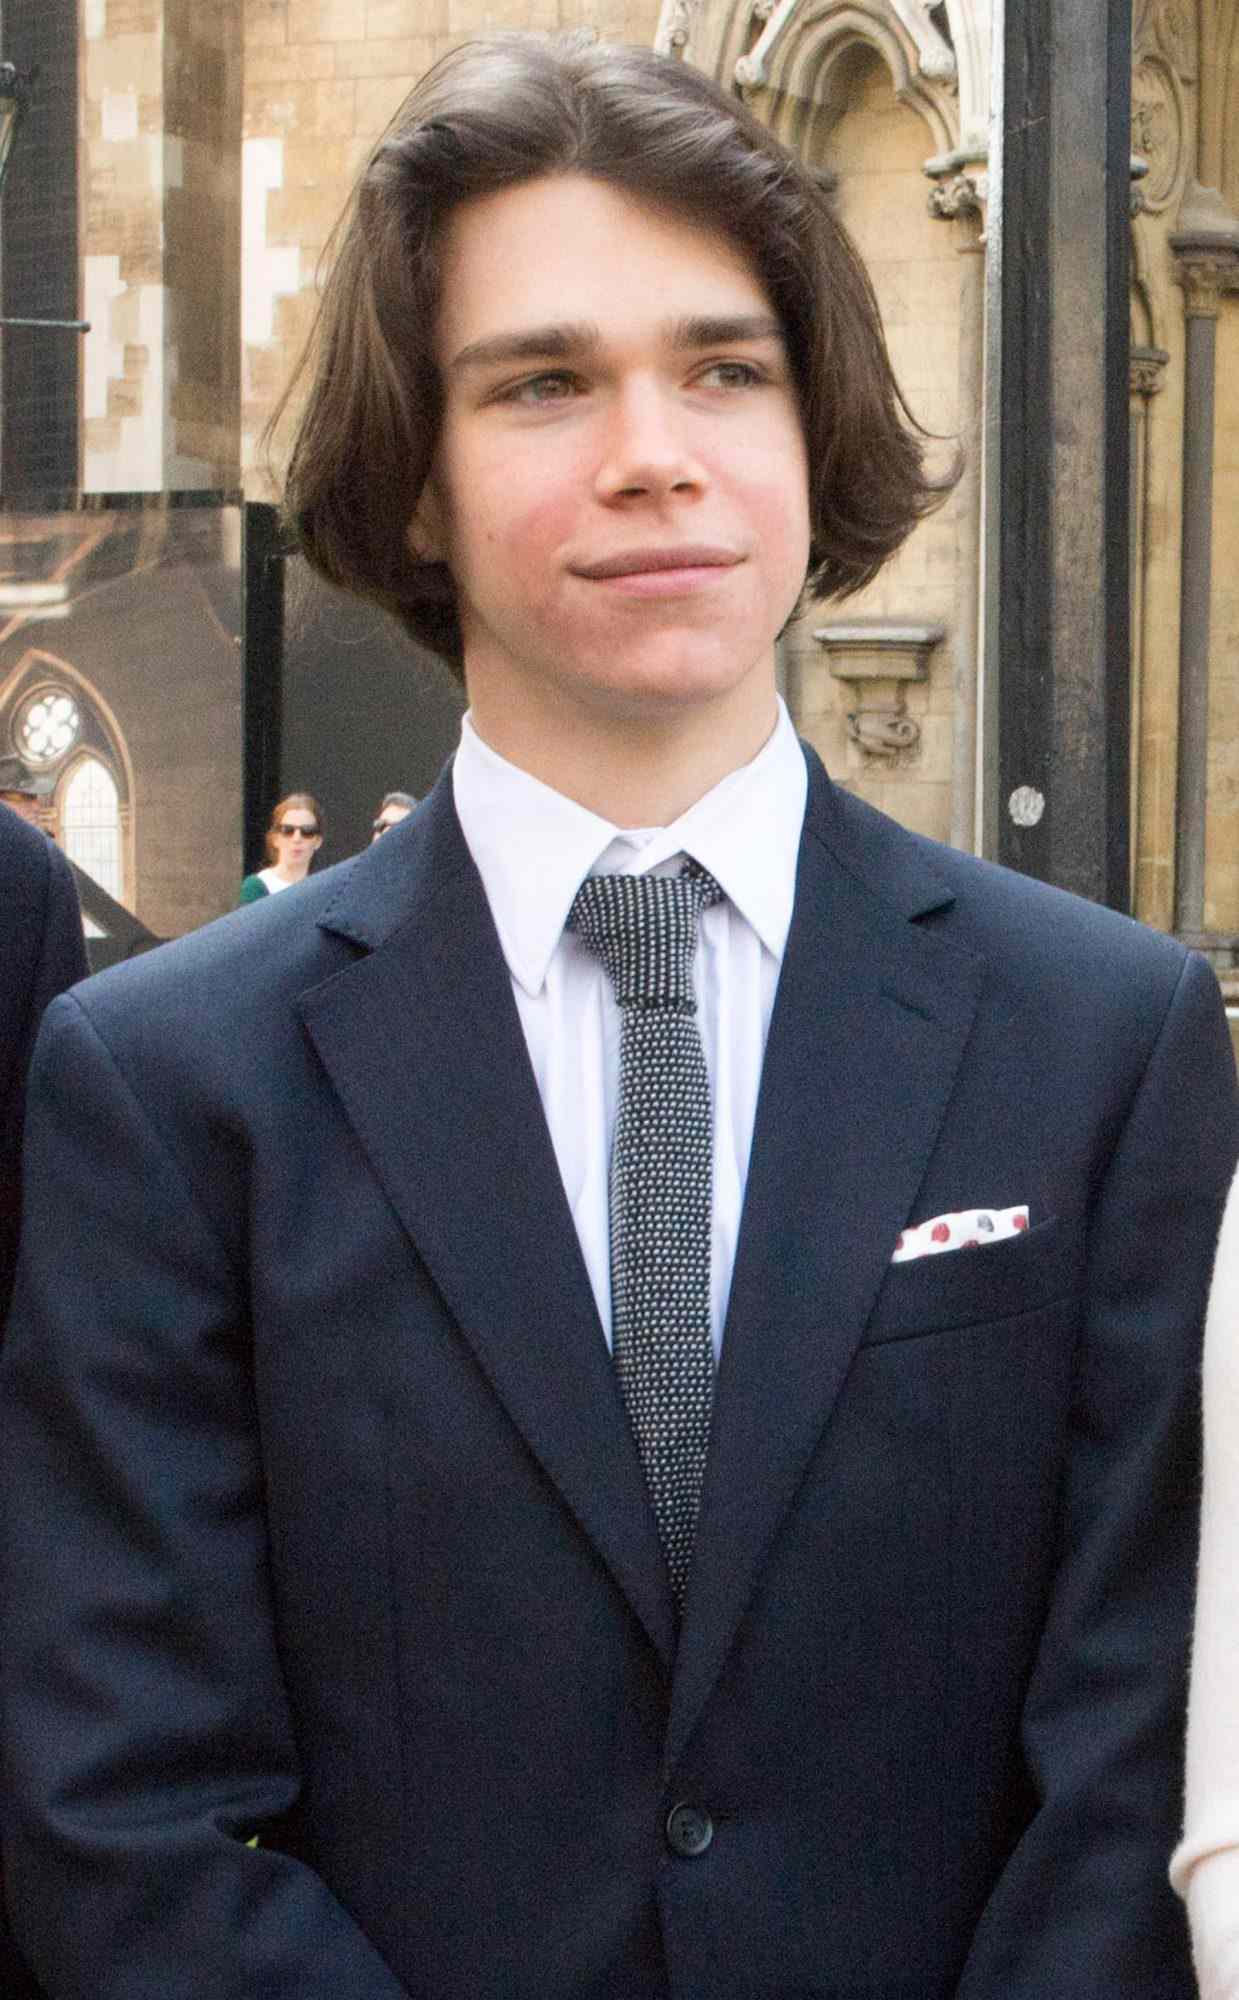 <p>The grandson of Princess Margaret and older son of Sarah and Daniel Chatto, who is currently 29th in the line of succession.</p>
                            